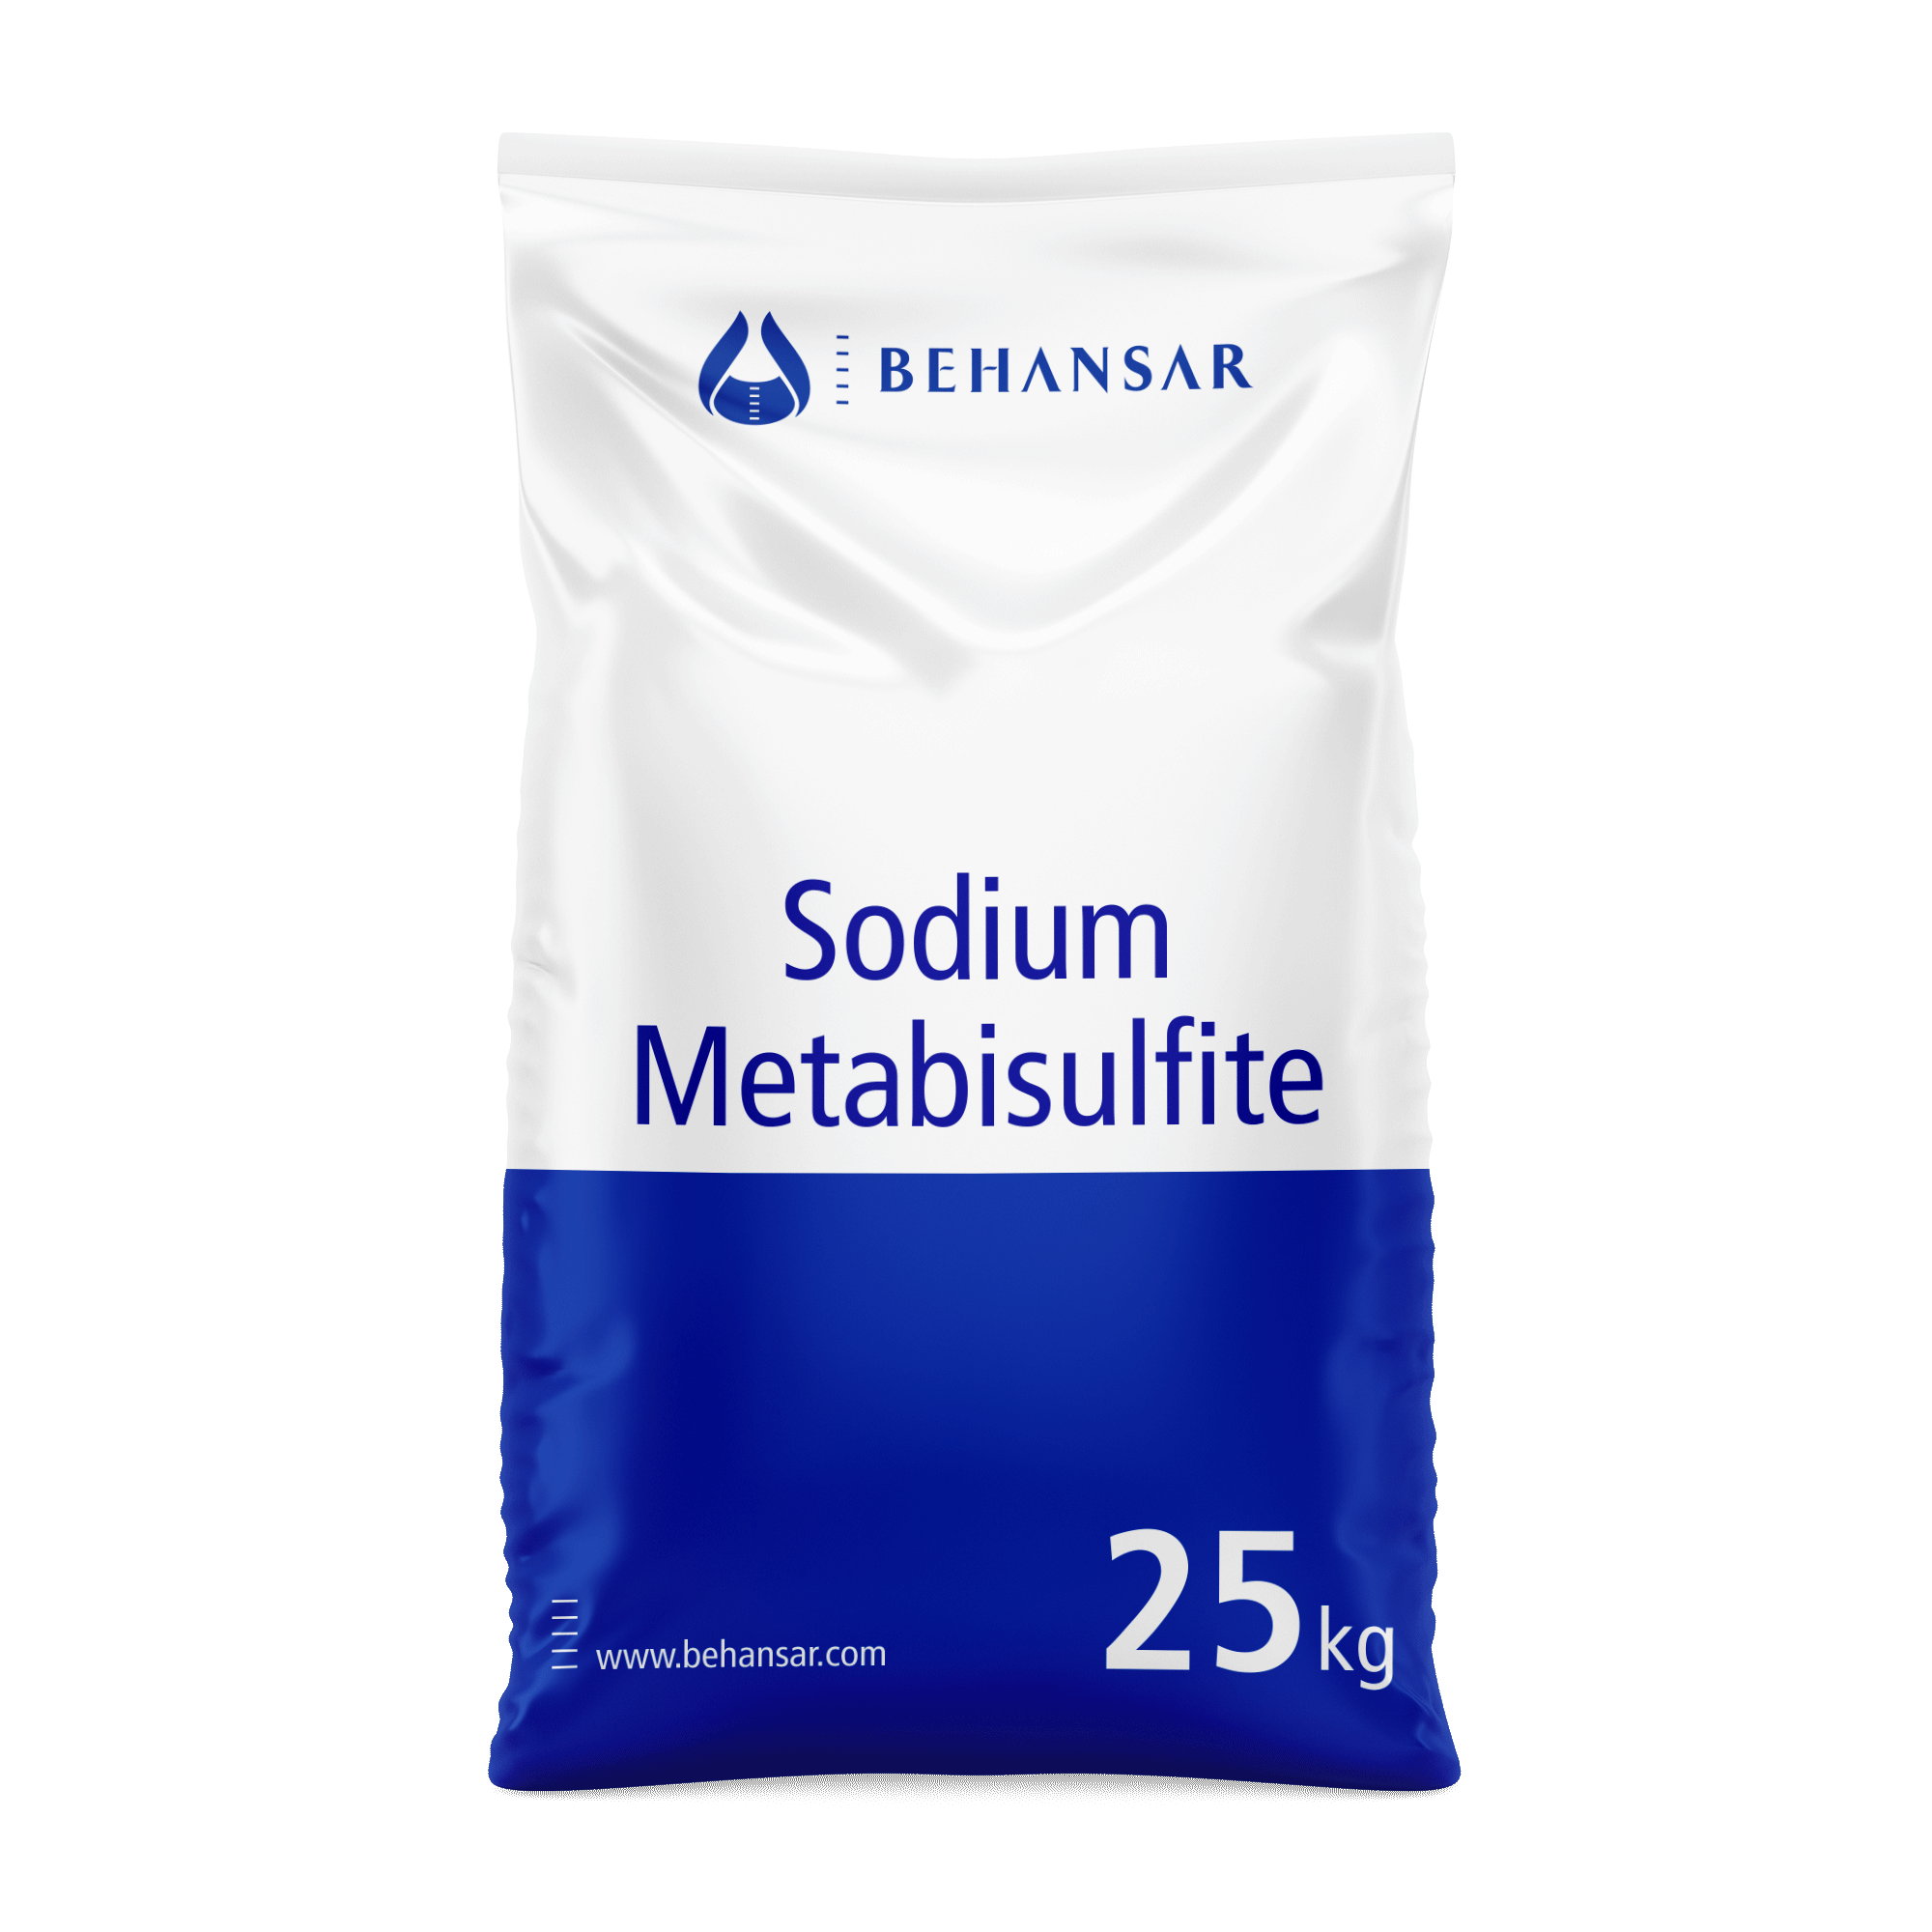 Sodium Metabisulfite is one of the products of Behansar Co